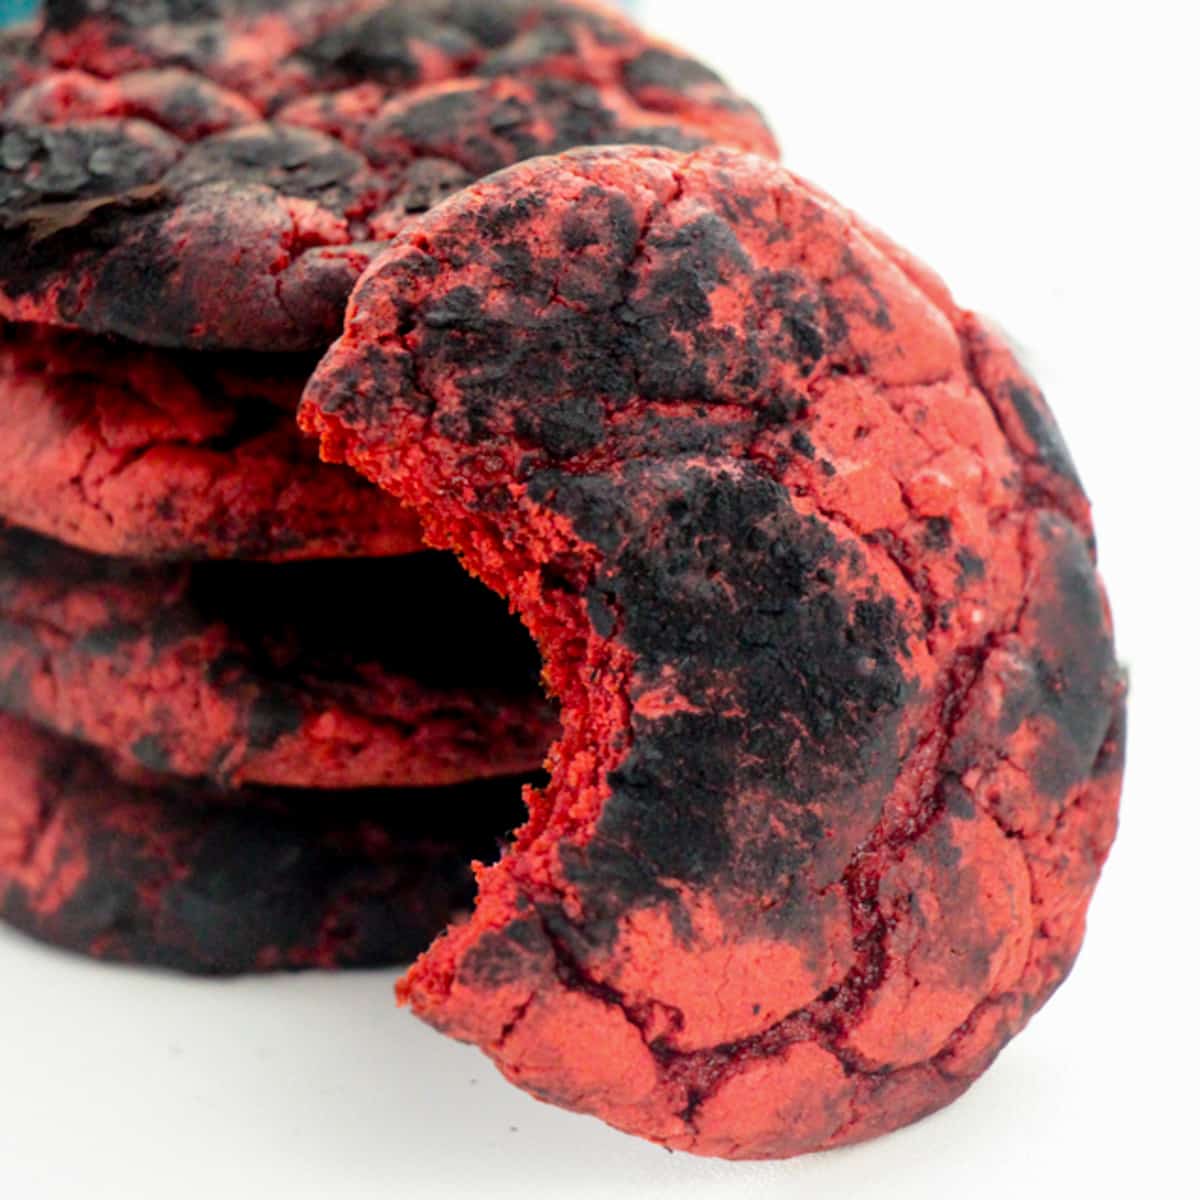 Red velvet cookies coated with black cocoa powder for a crinkle cookie effect. One cookie has a bite taken out of it to reveal the inside of the soft red velvet cake cookie.